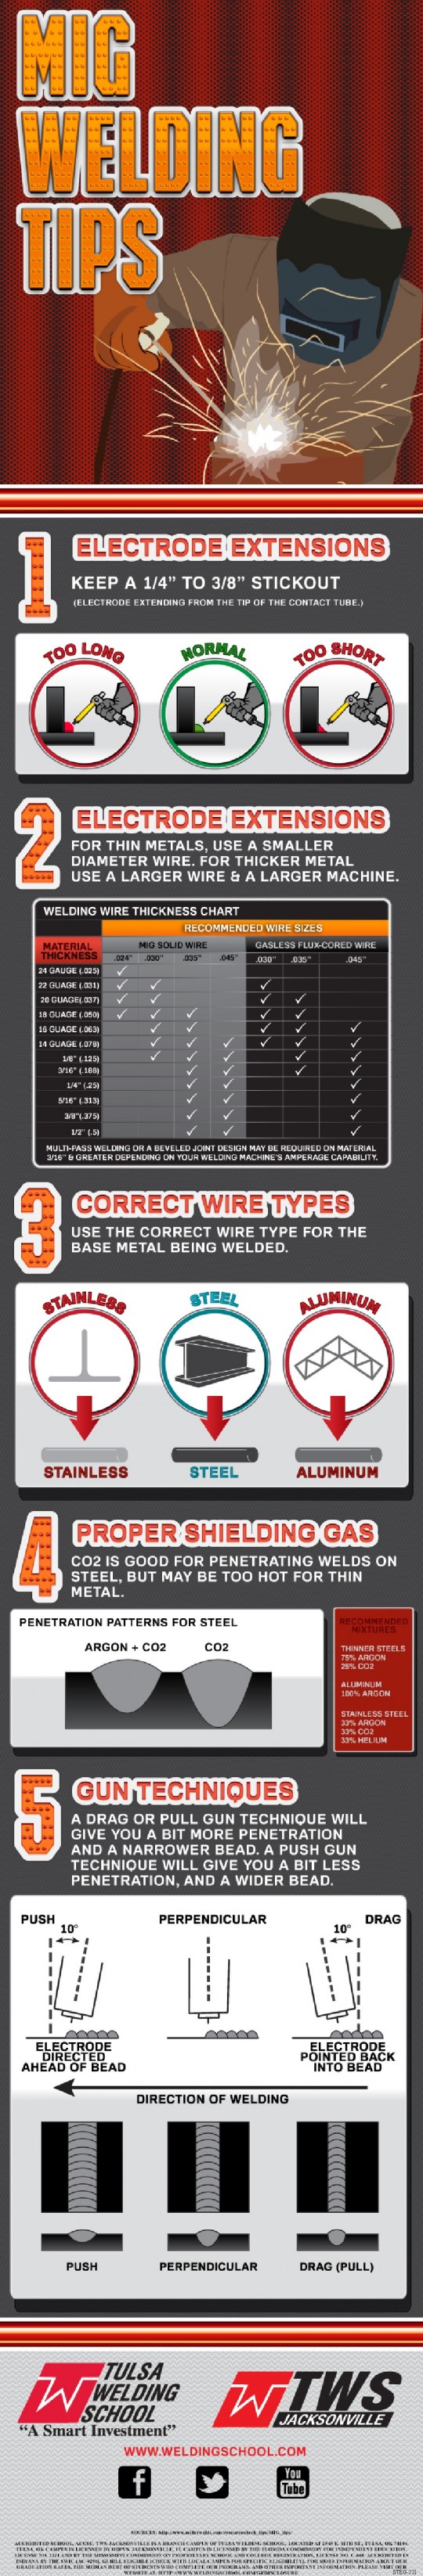 [Infographic] MIG Welding tips for Beginners ILMO Products Company